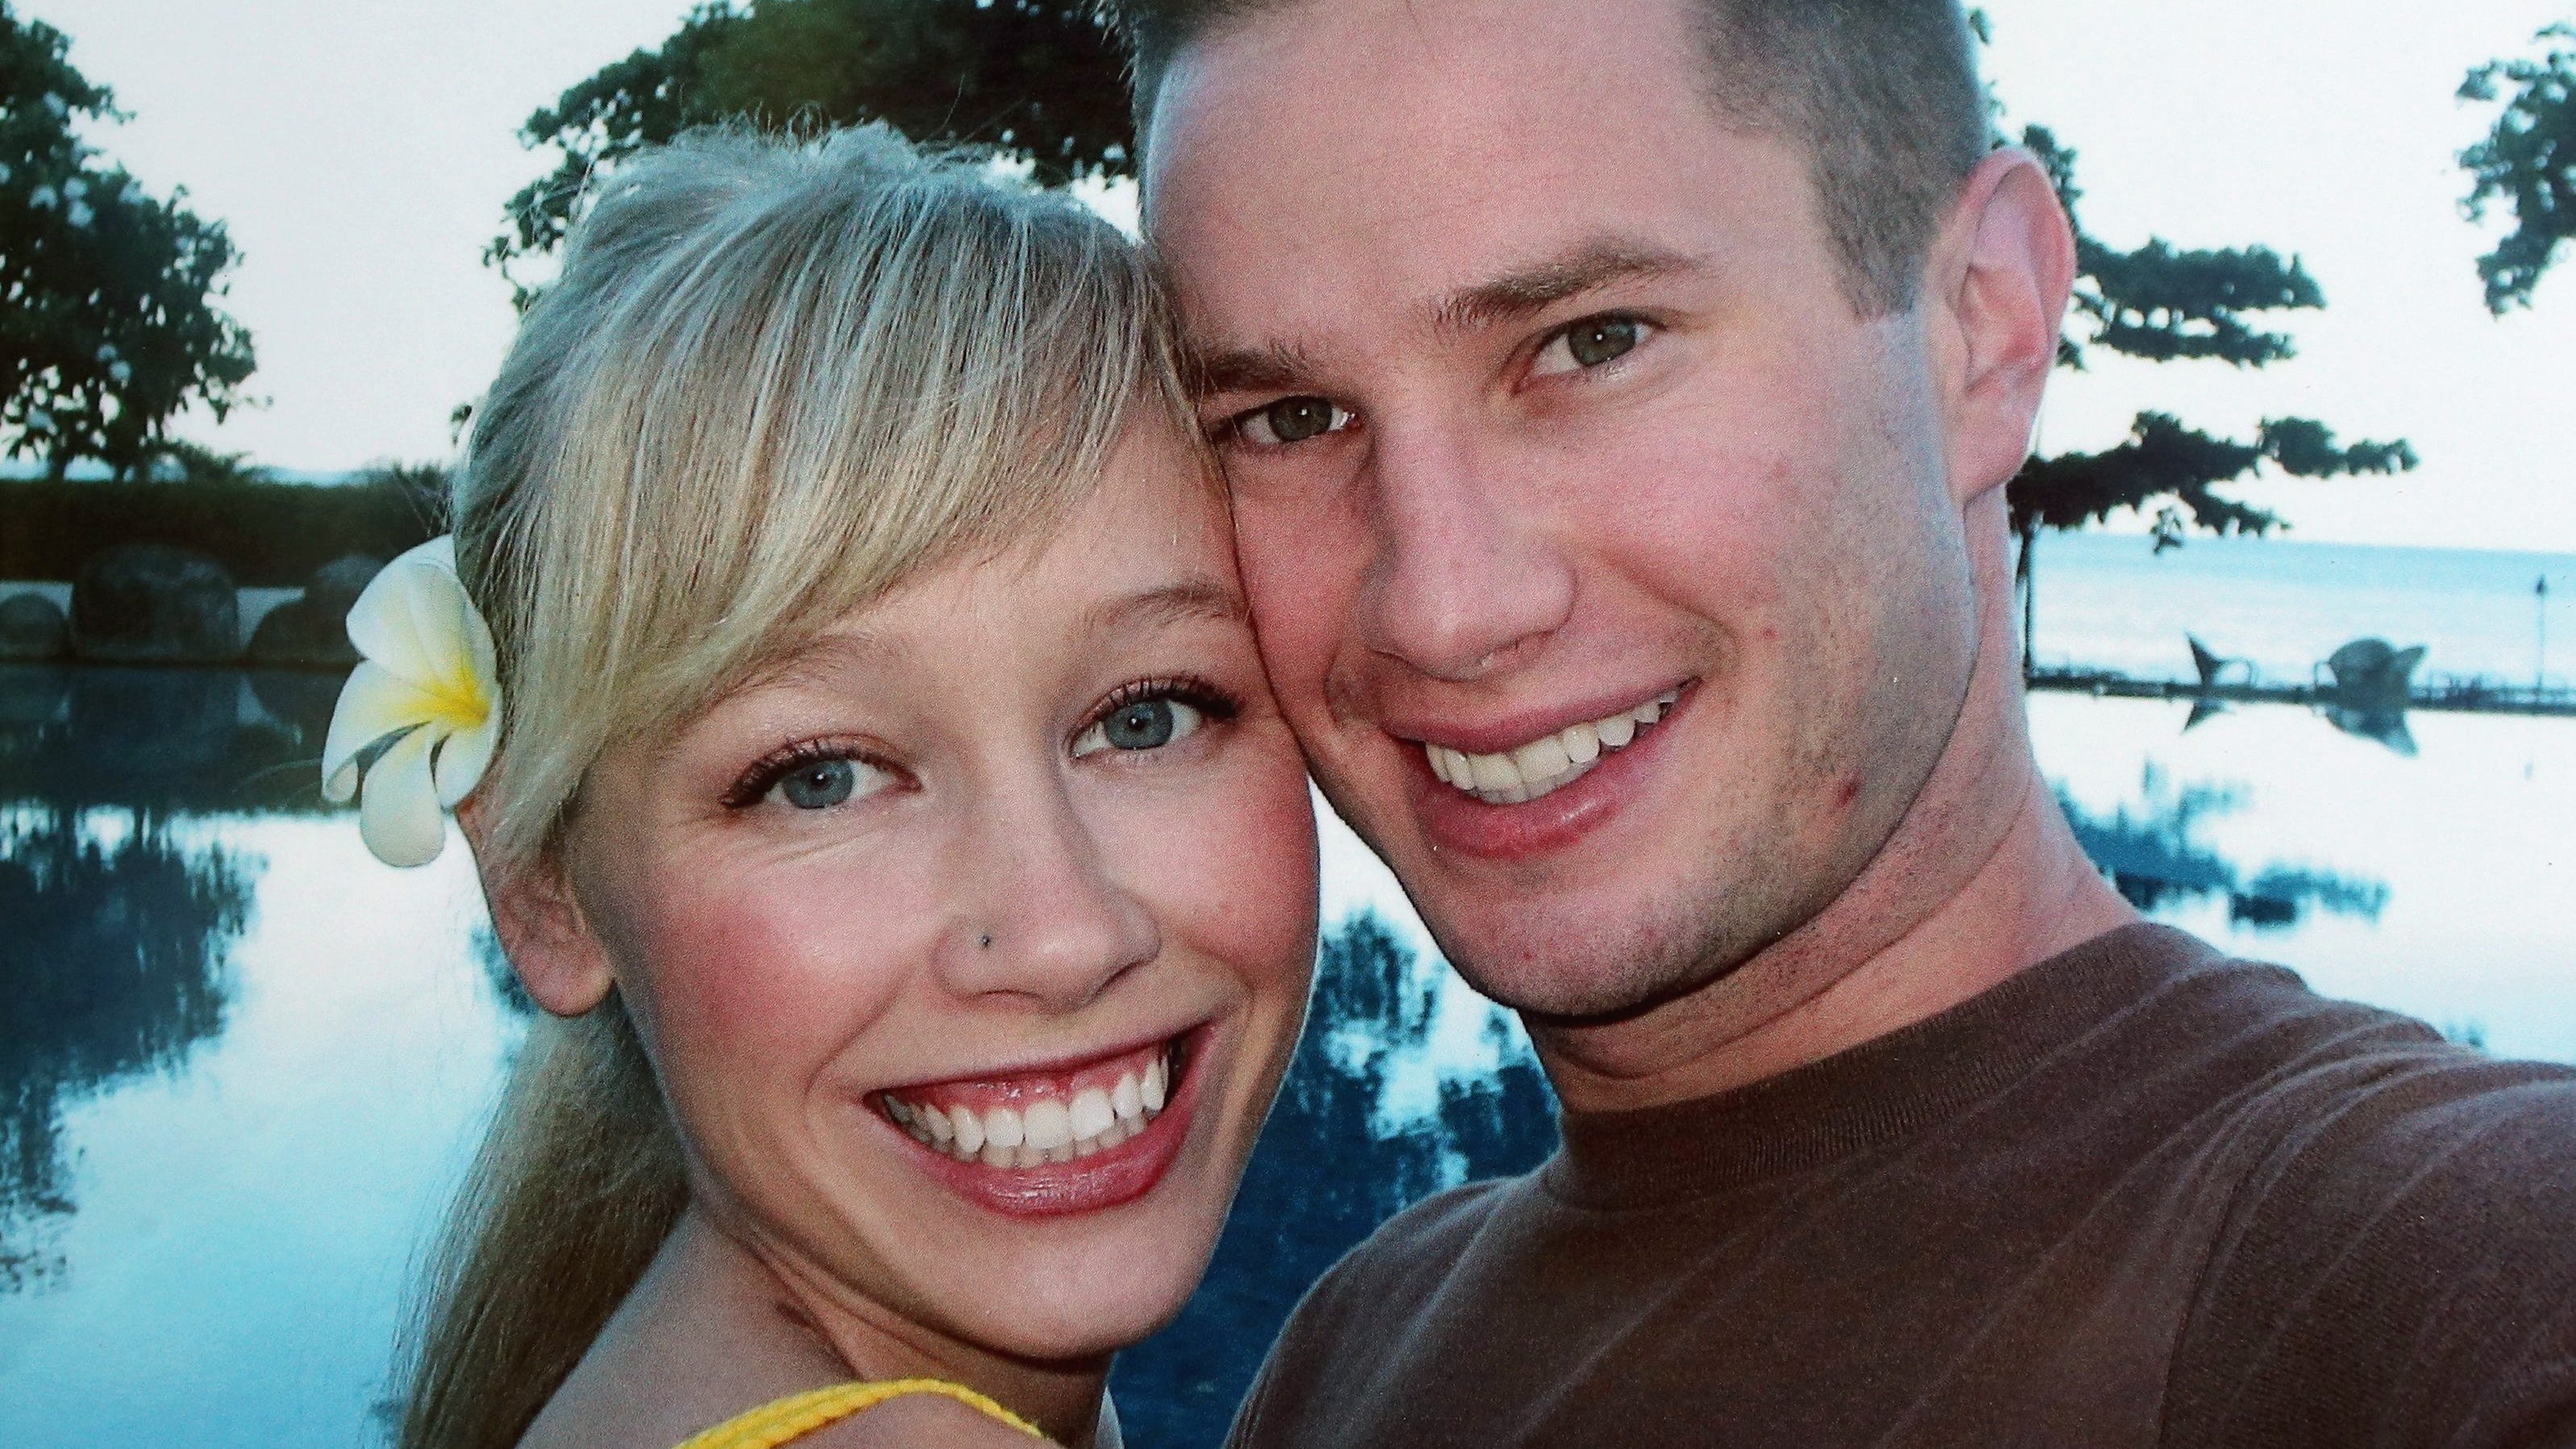 Will 2018 see as much activity in the Sherri Papini case as 2017?